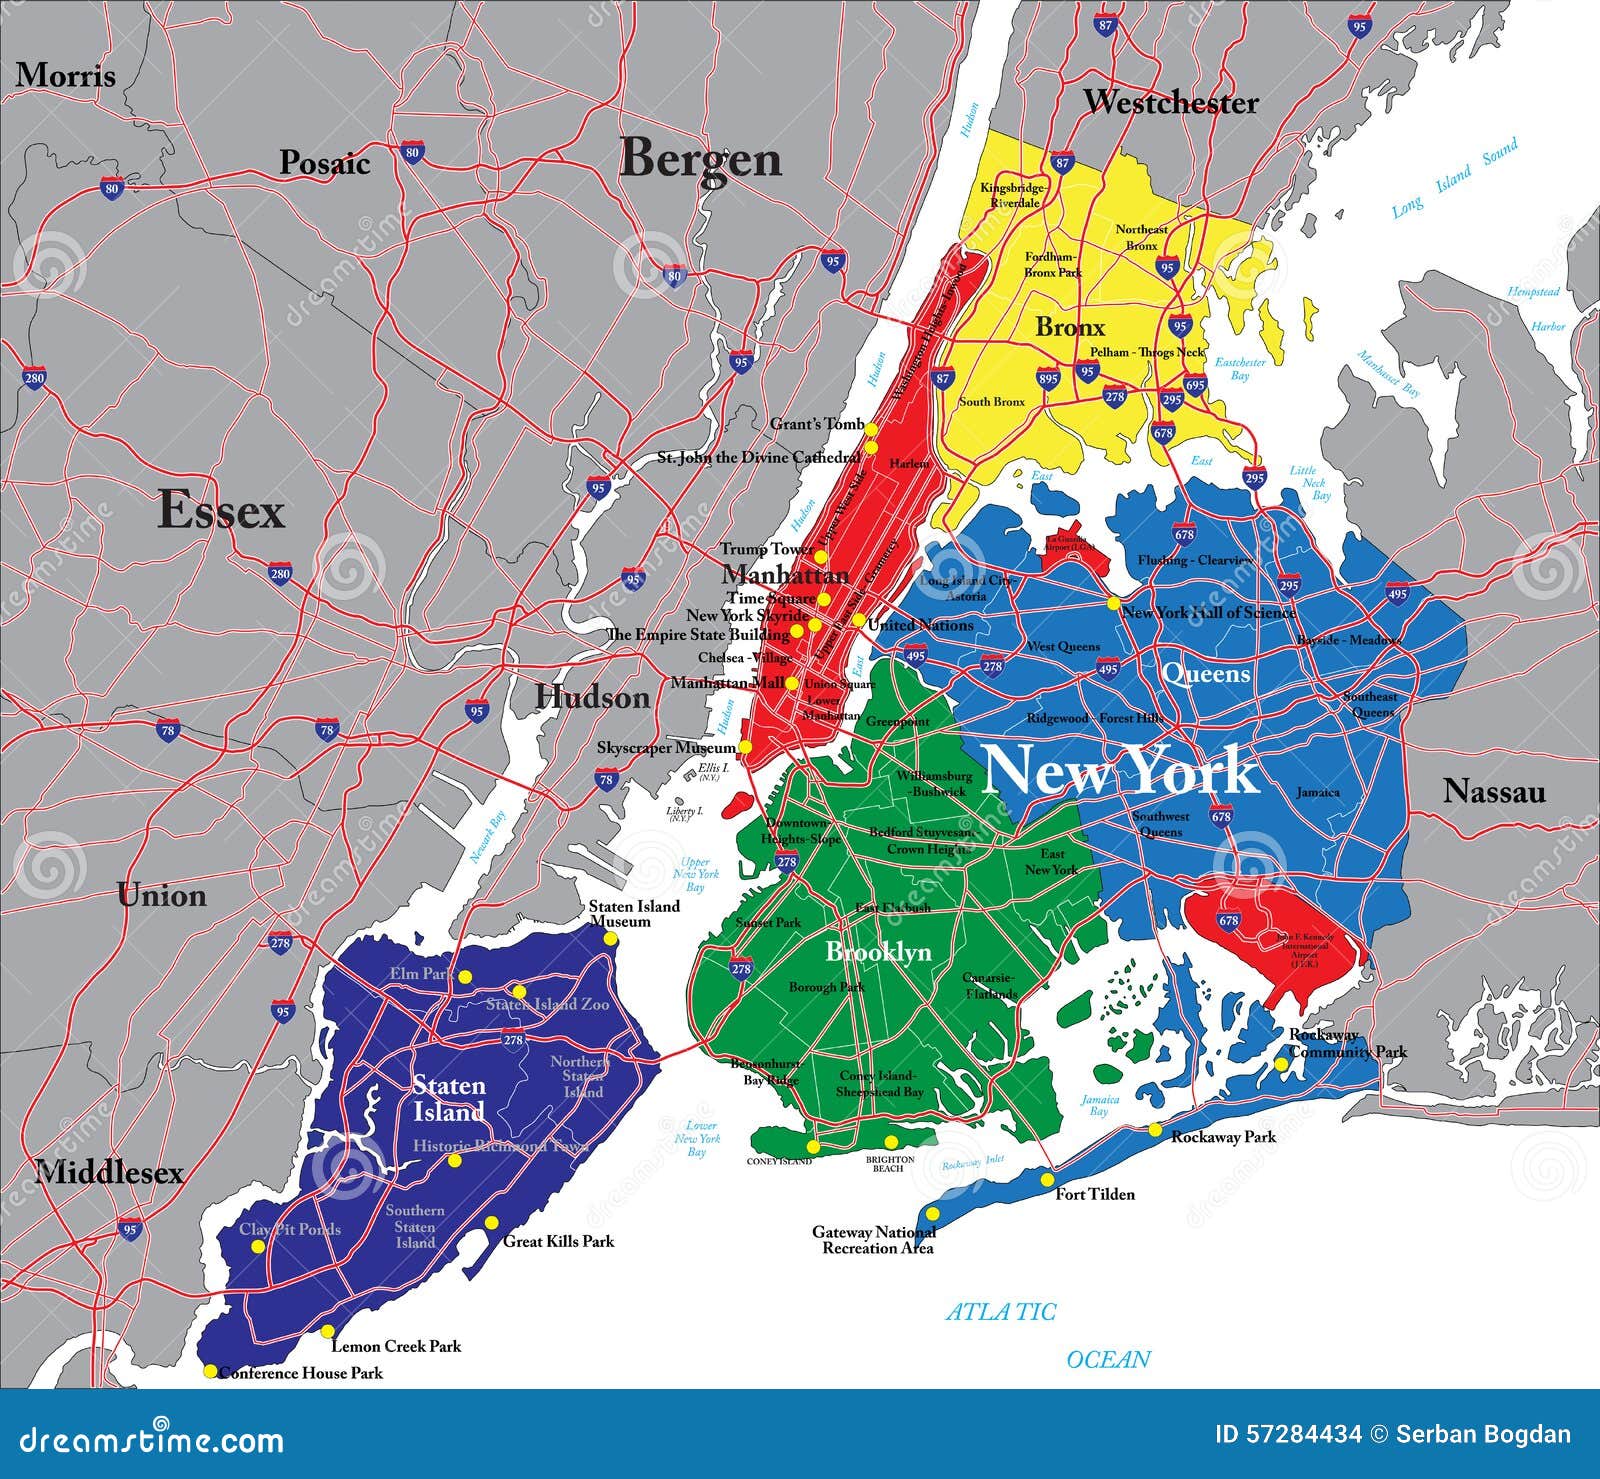 Areas To Avoid In New York Map - Best Design Idea